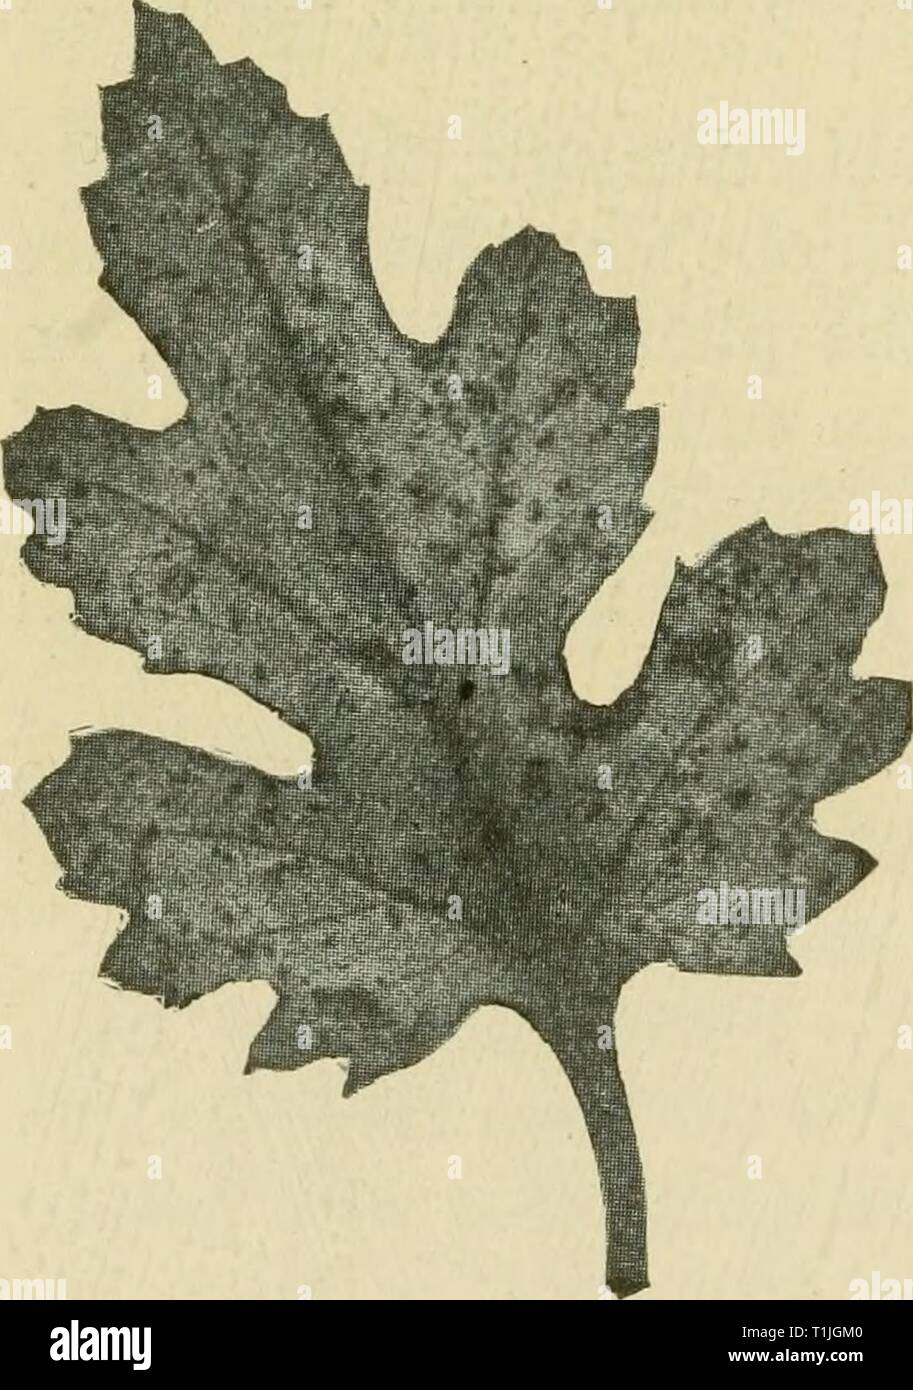 Diseases of economic plants (1921) Diseases of economic plants  diseasesofeconom01stev Year: 1921  418 Diseases of Economic Plants CHRYSANTHEMUM Leaf-spot ' {Septoria chrysanthernella Cav.). — Large brown to black blotches, often irregularly circular and of indefinite border, appear upon the leaves. These enlarge and coalesce to involve the whole leaf, which withers, dies, and falls away. The lower leaves are first affected, but in later stages all the leaves of the plant may be badly spotted, and practically complete defoliation may result. Cuttings from infected stock should be avoided. All  Stock Photo